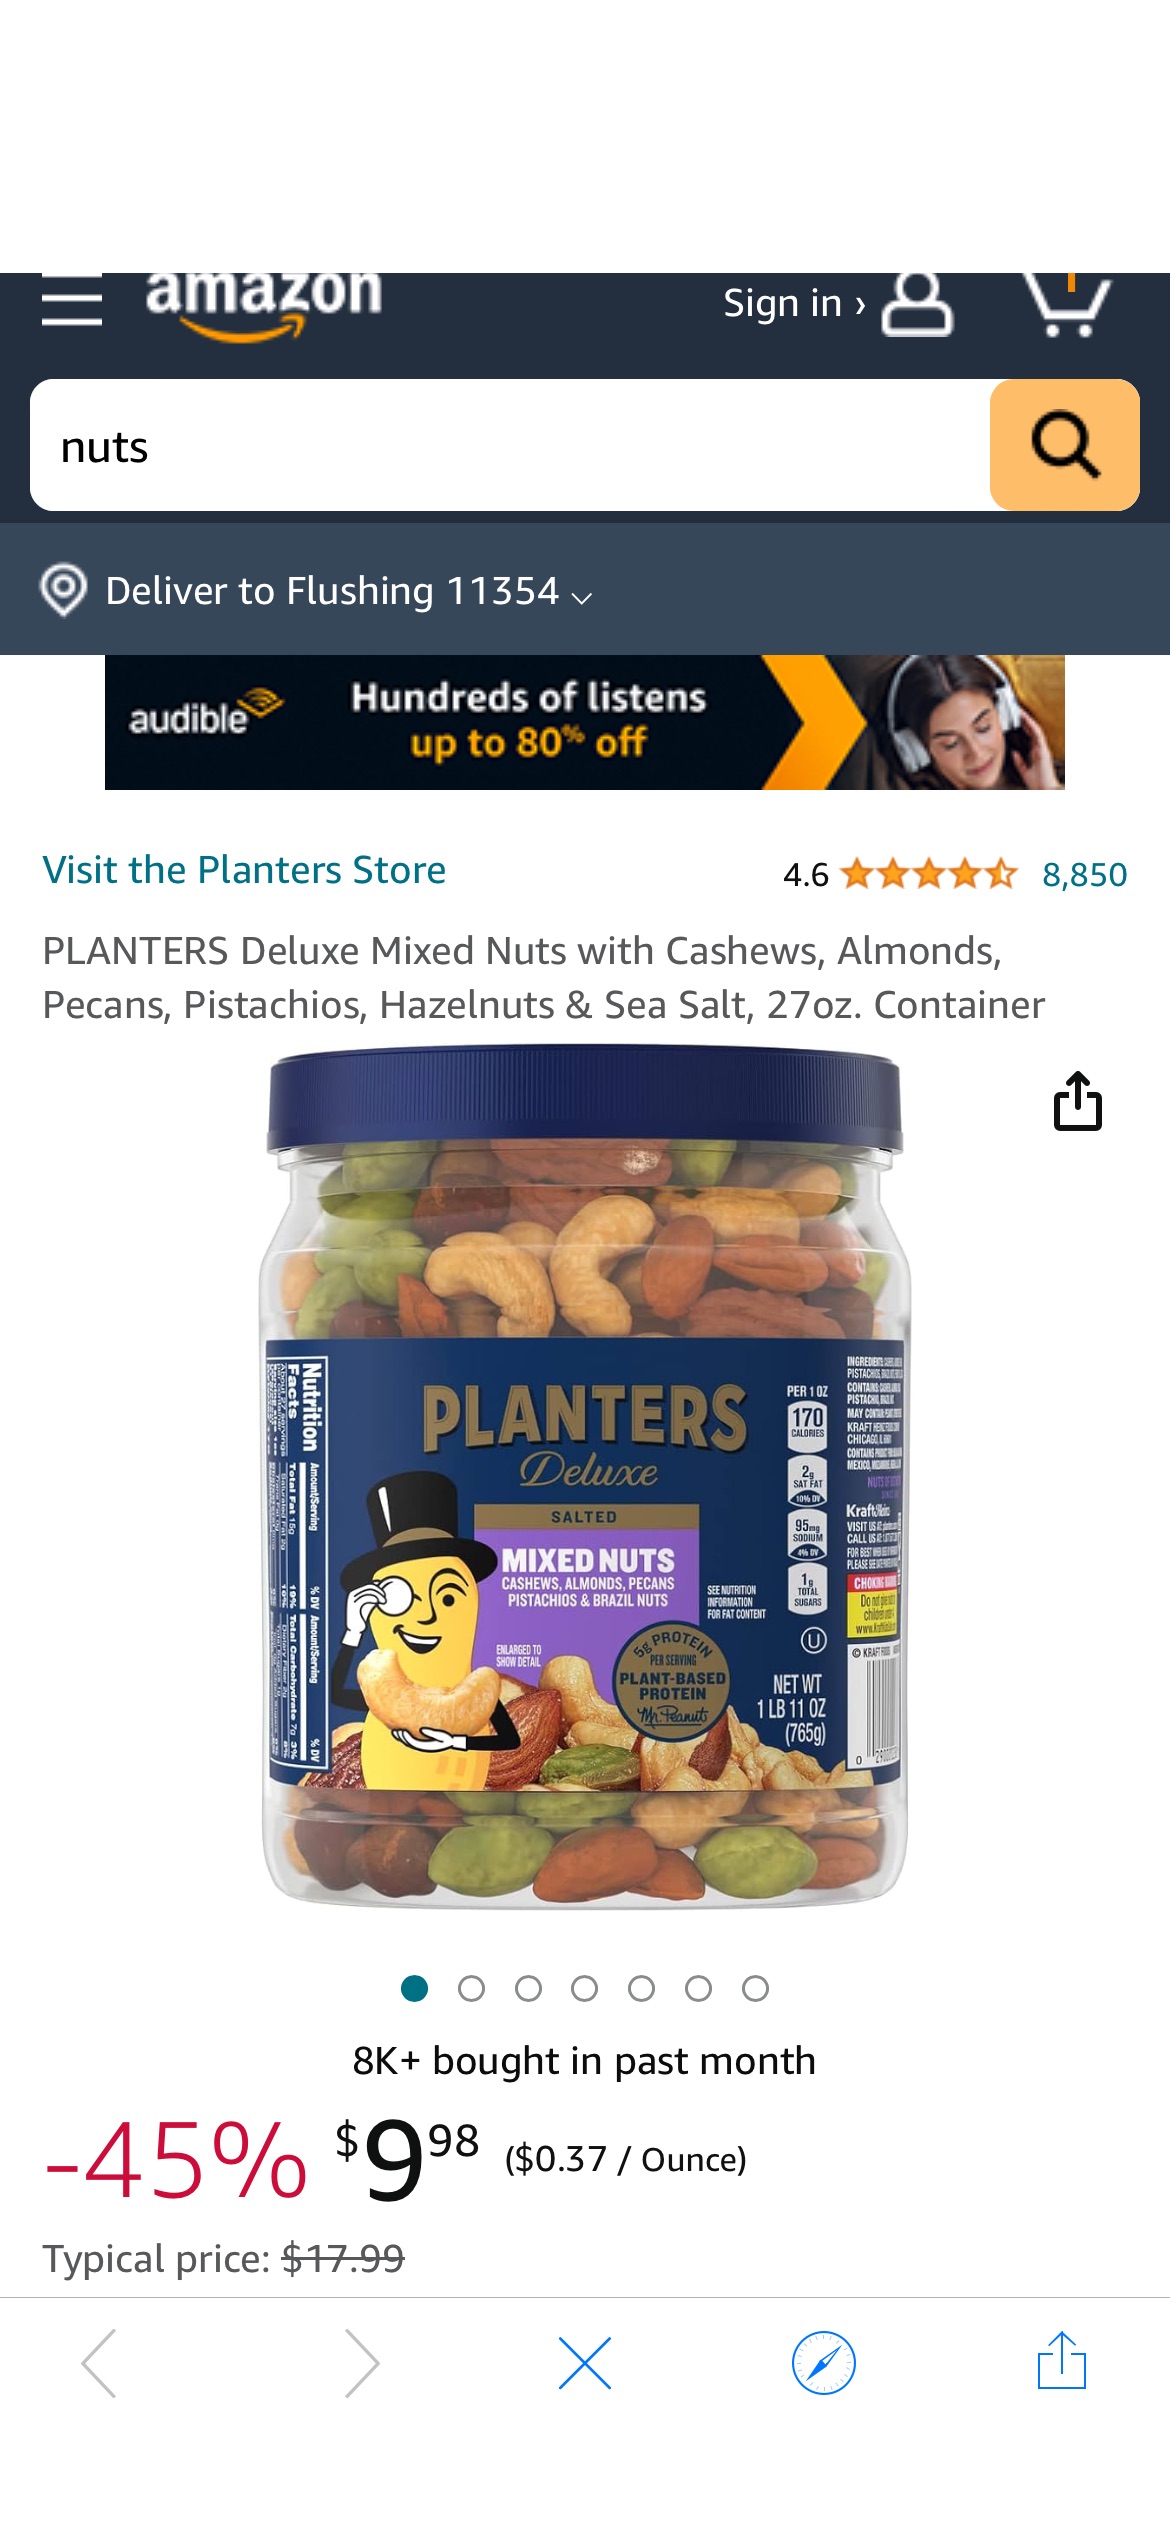 Amazon.com : PLANTERS Deluxe Mixed Nuts with Cashews, Almonds, Pecans, Pistachios, Hazelnuts & Sea Salt, 27oz. Container : Grocery & Gourmet Food